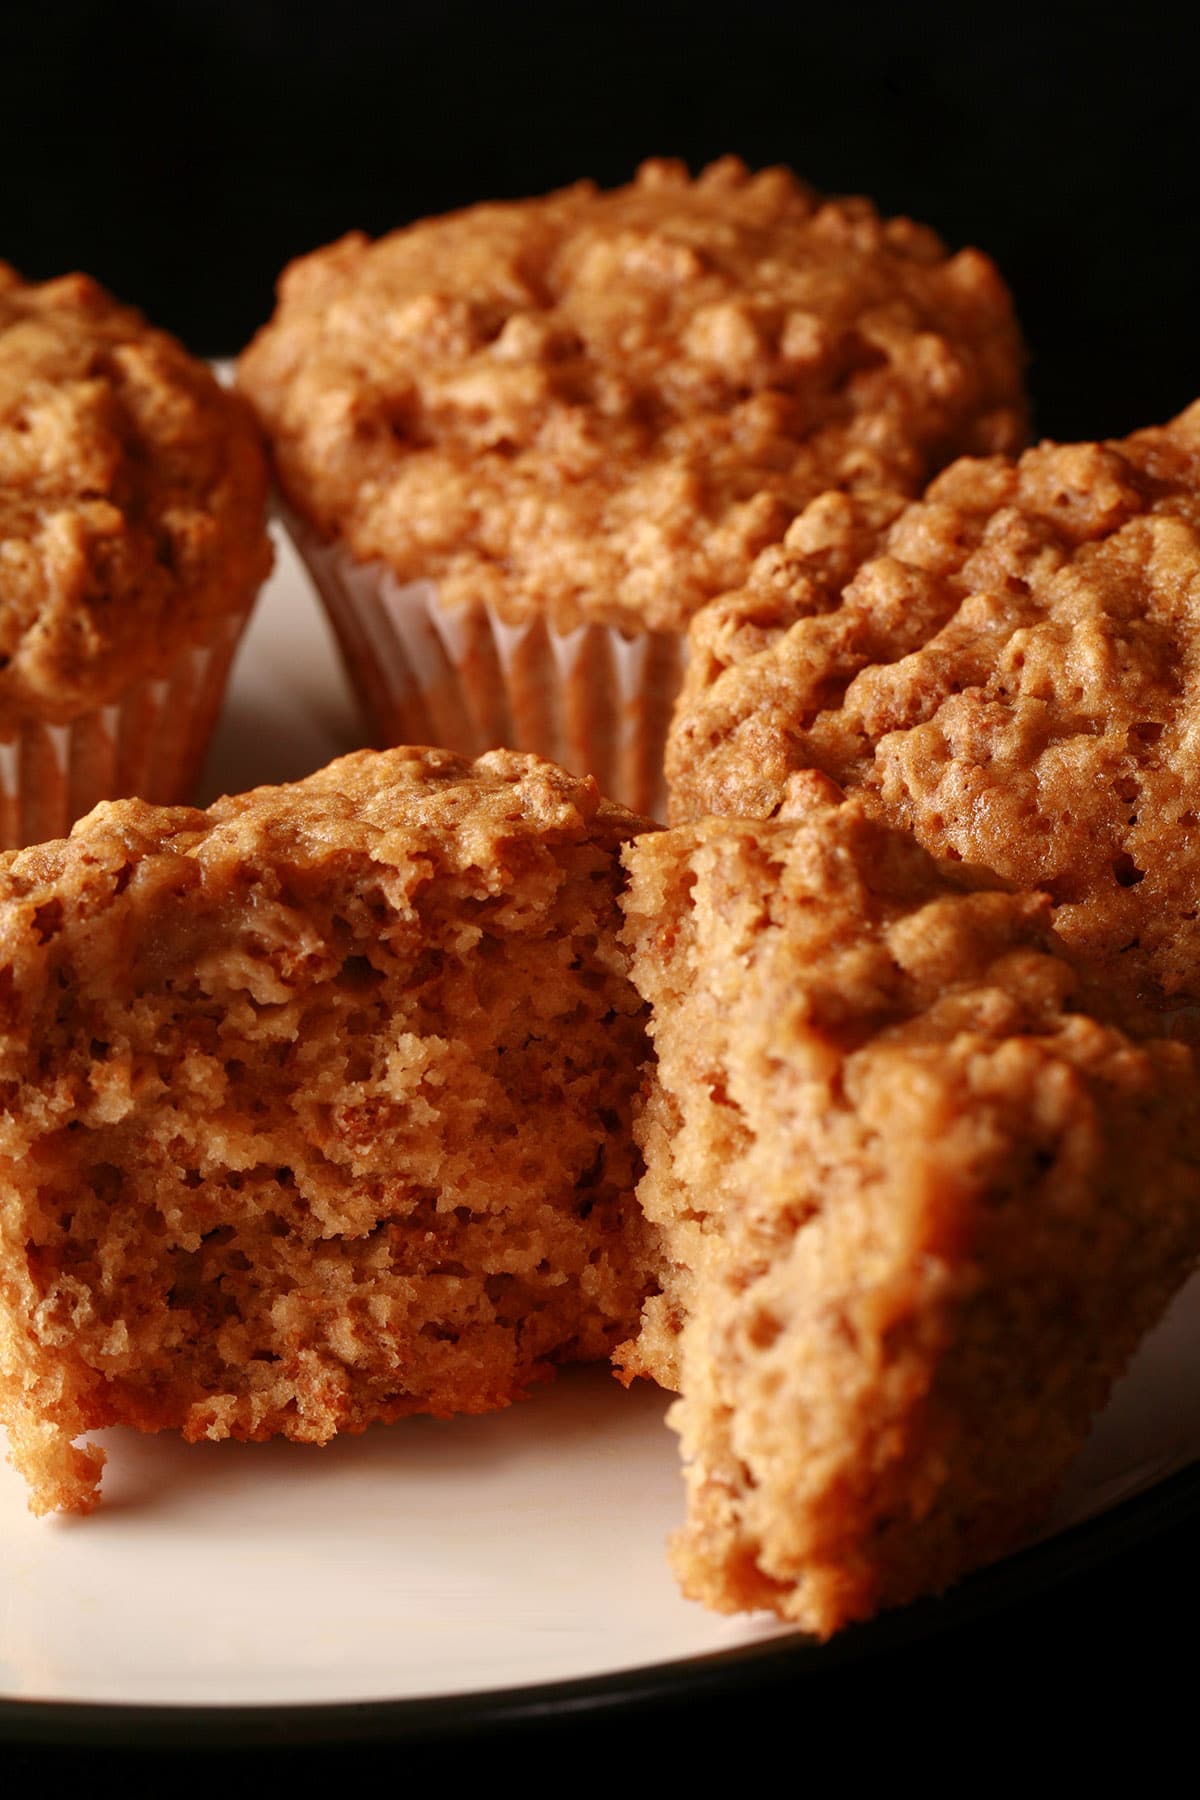 A plate of All-Bran Muffins.